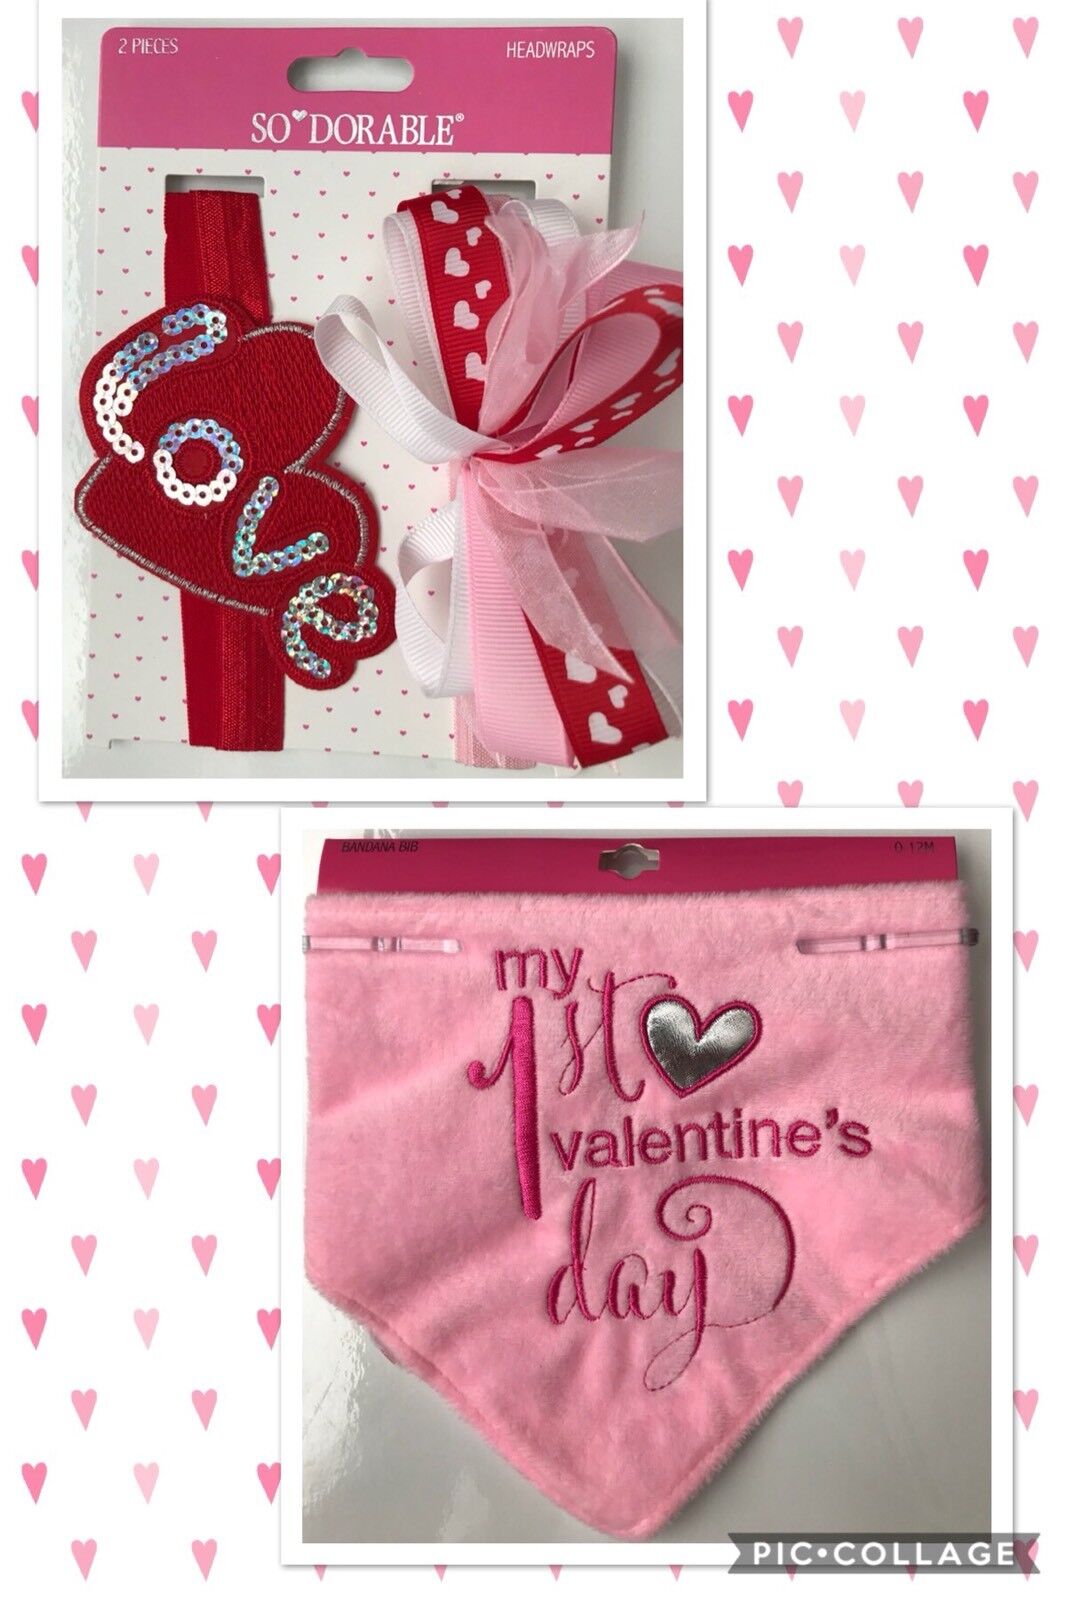 Super Special SALE held NWT So Dorable Headwraps And Bandana My shop Valenti Bib 1st Pink Set